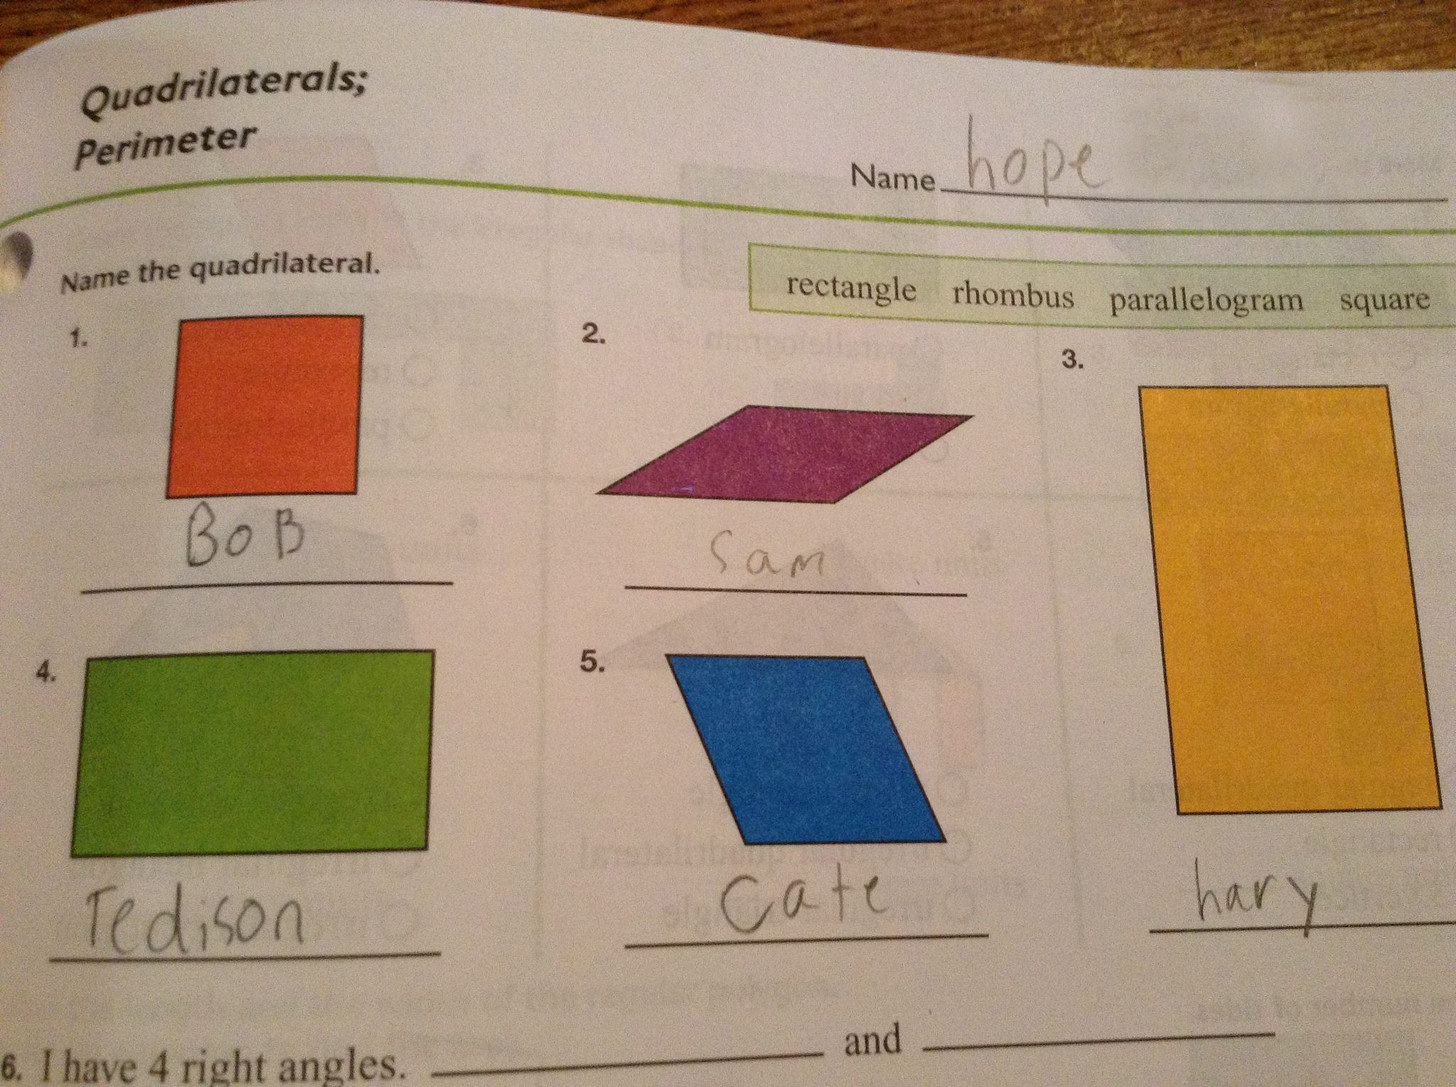 What's The Funniest Answer You've Seen On A Kid's Homework?